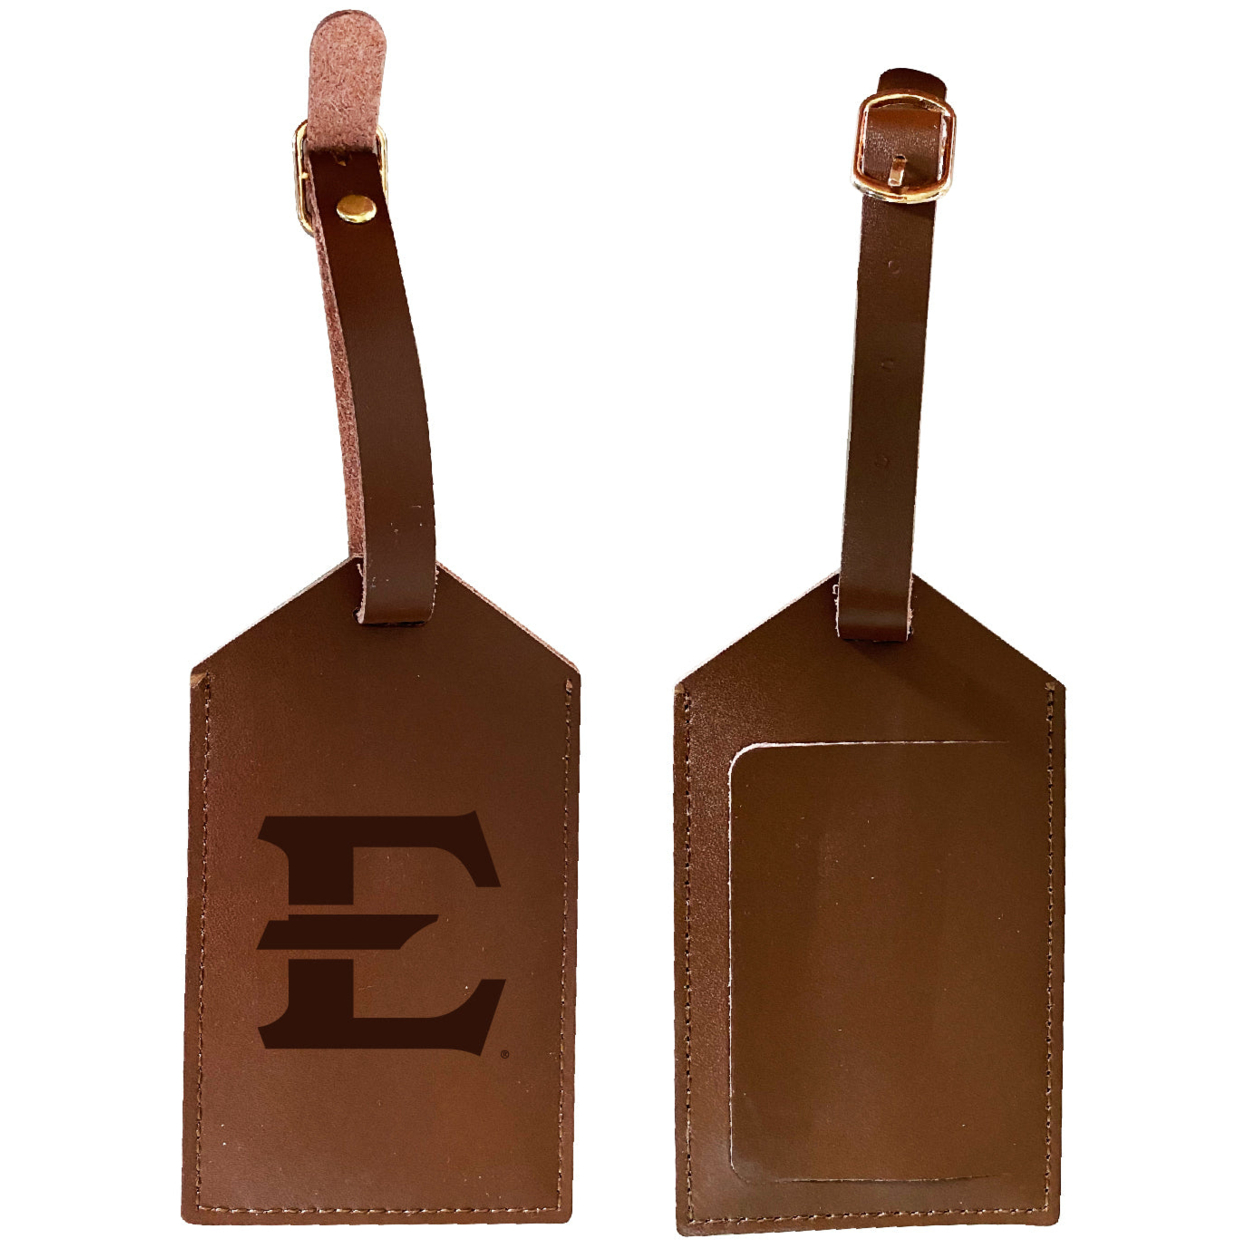 East Tennessee State University Leather Luggage Tag Engraved